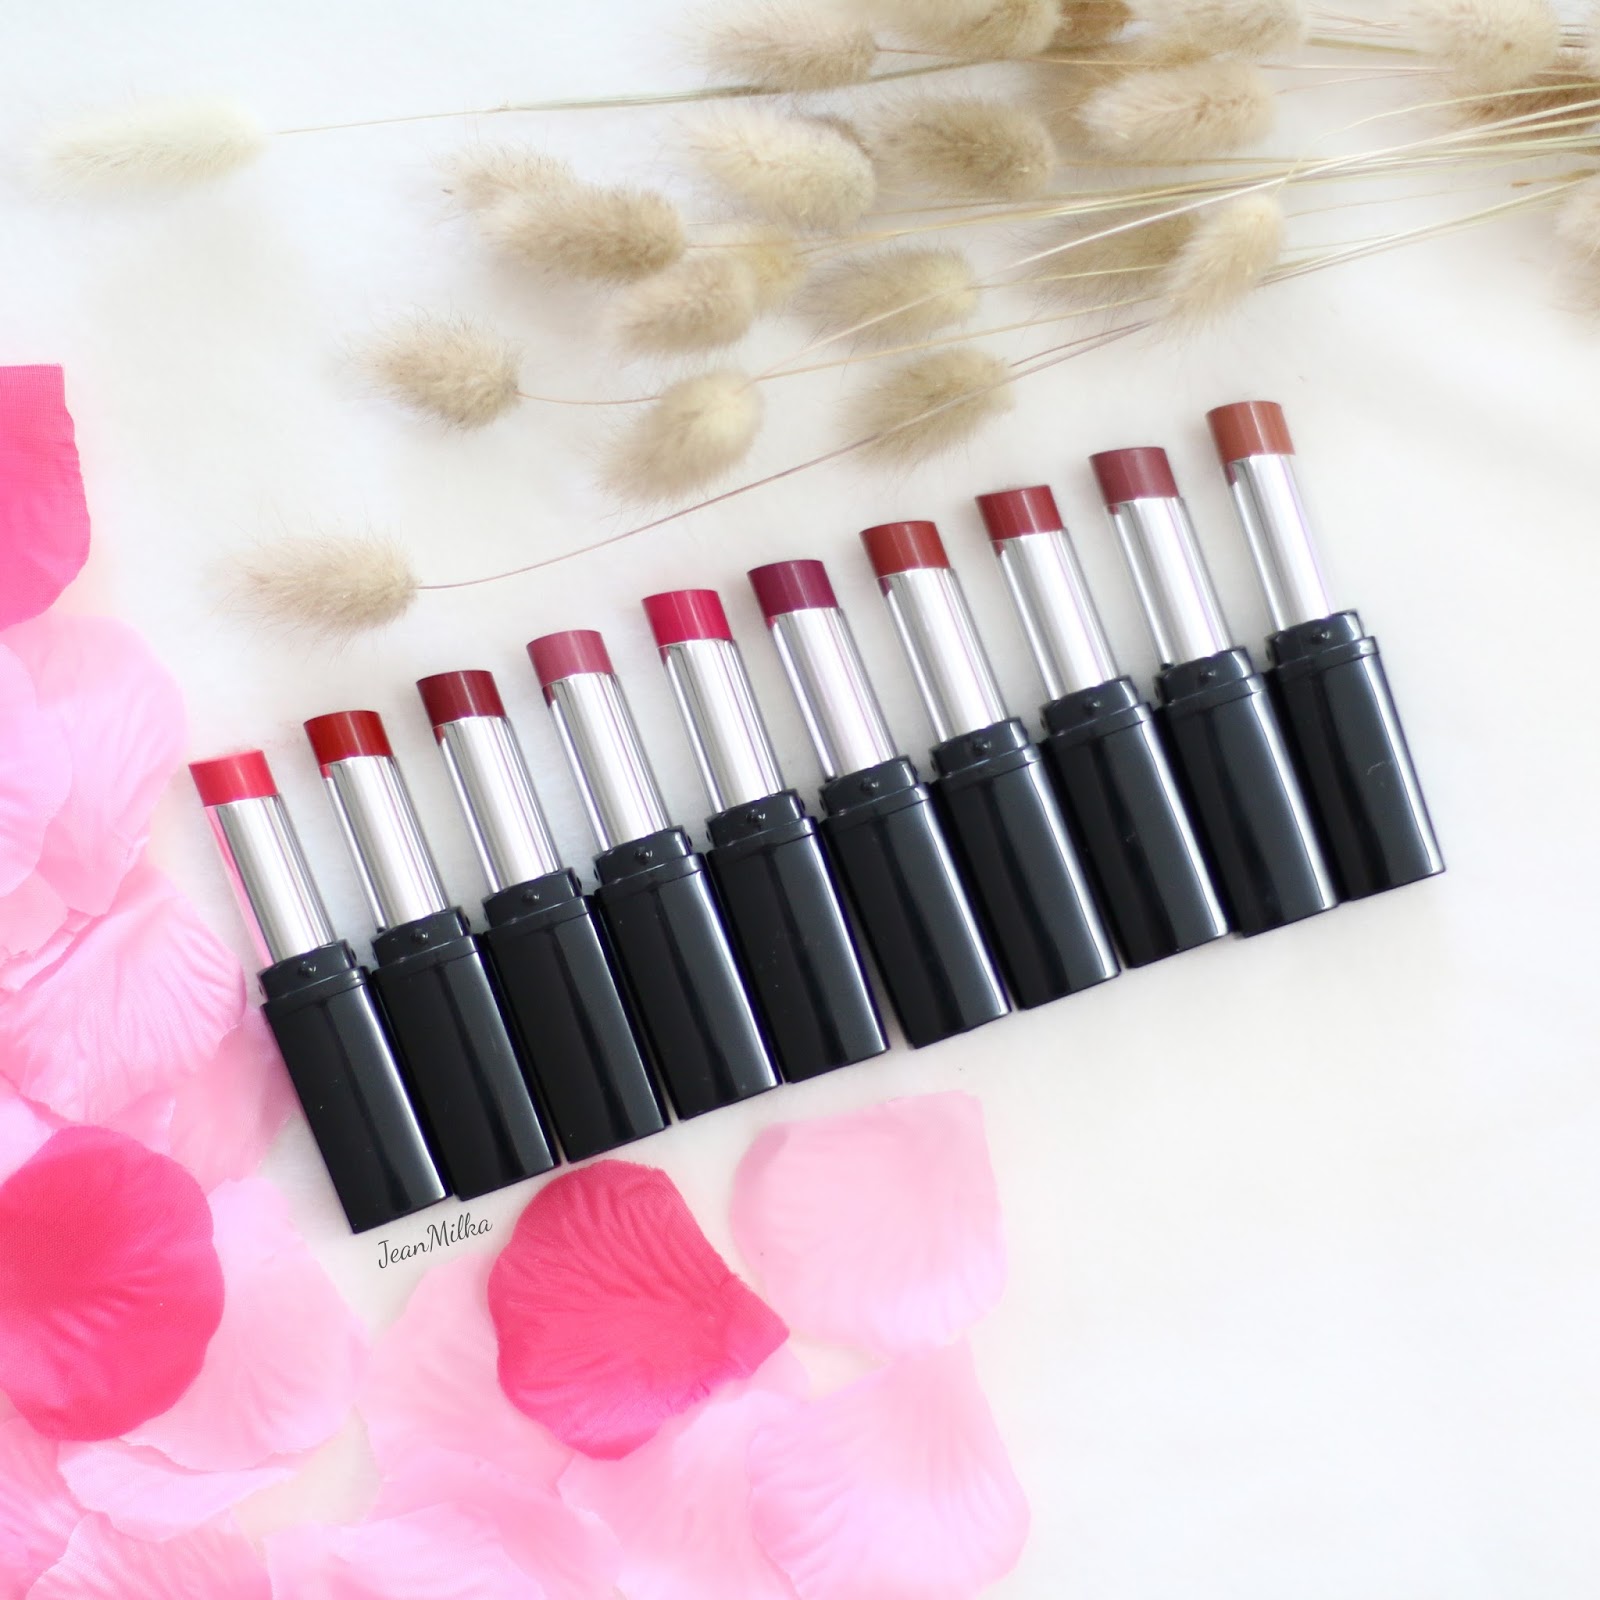 PIXY Matte In Love Lipstick Review All Shades | Jean Milka